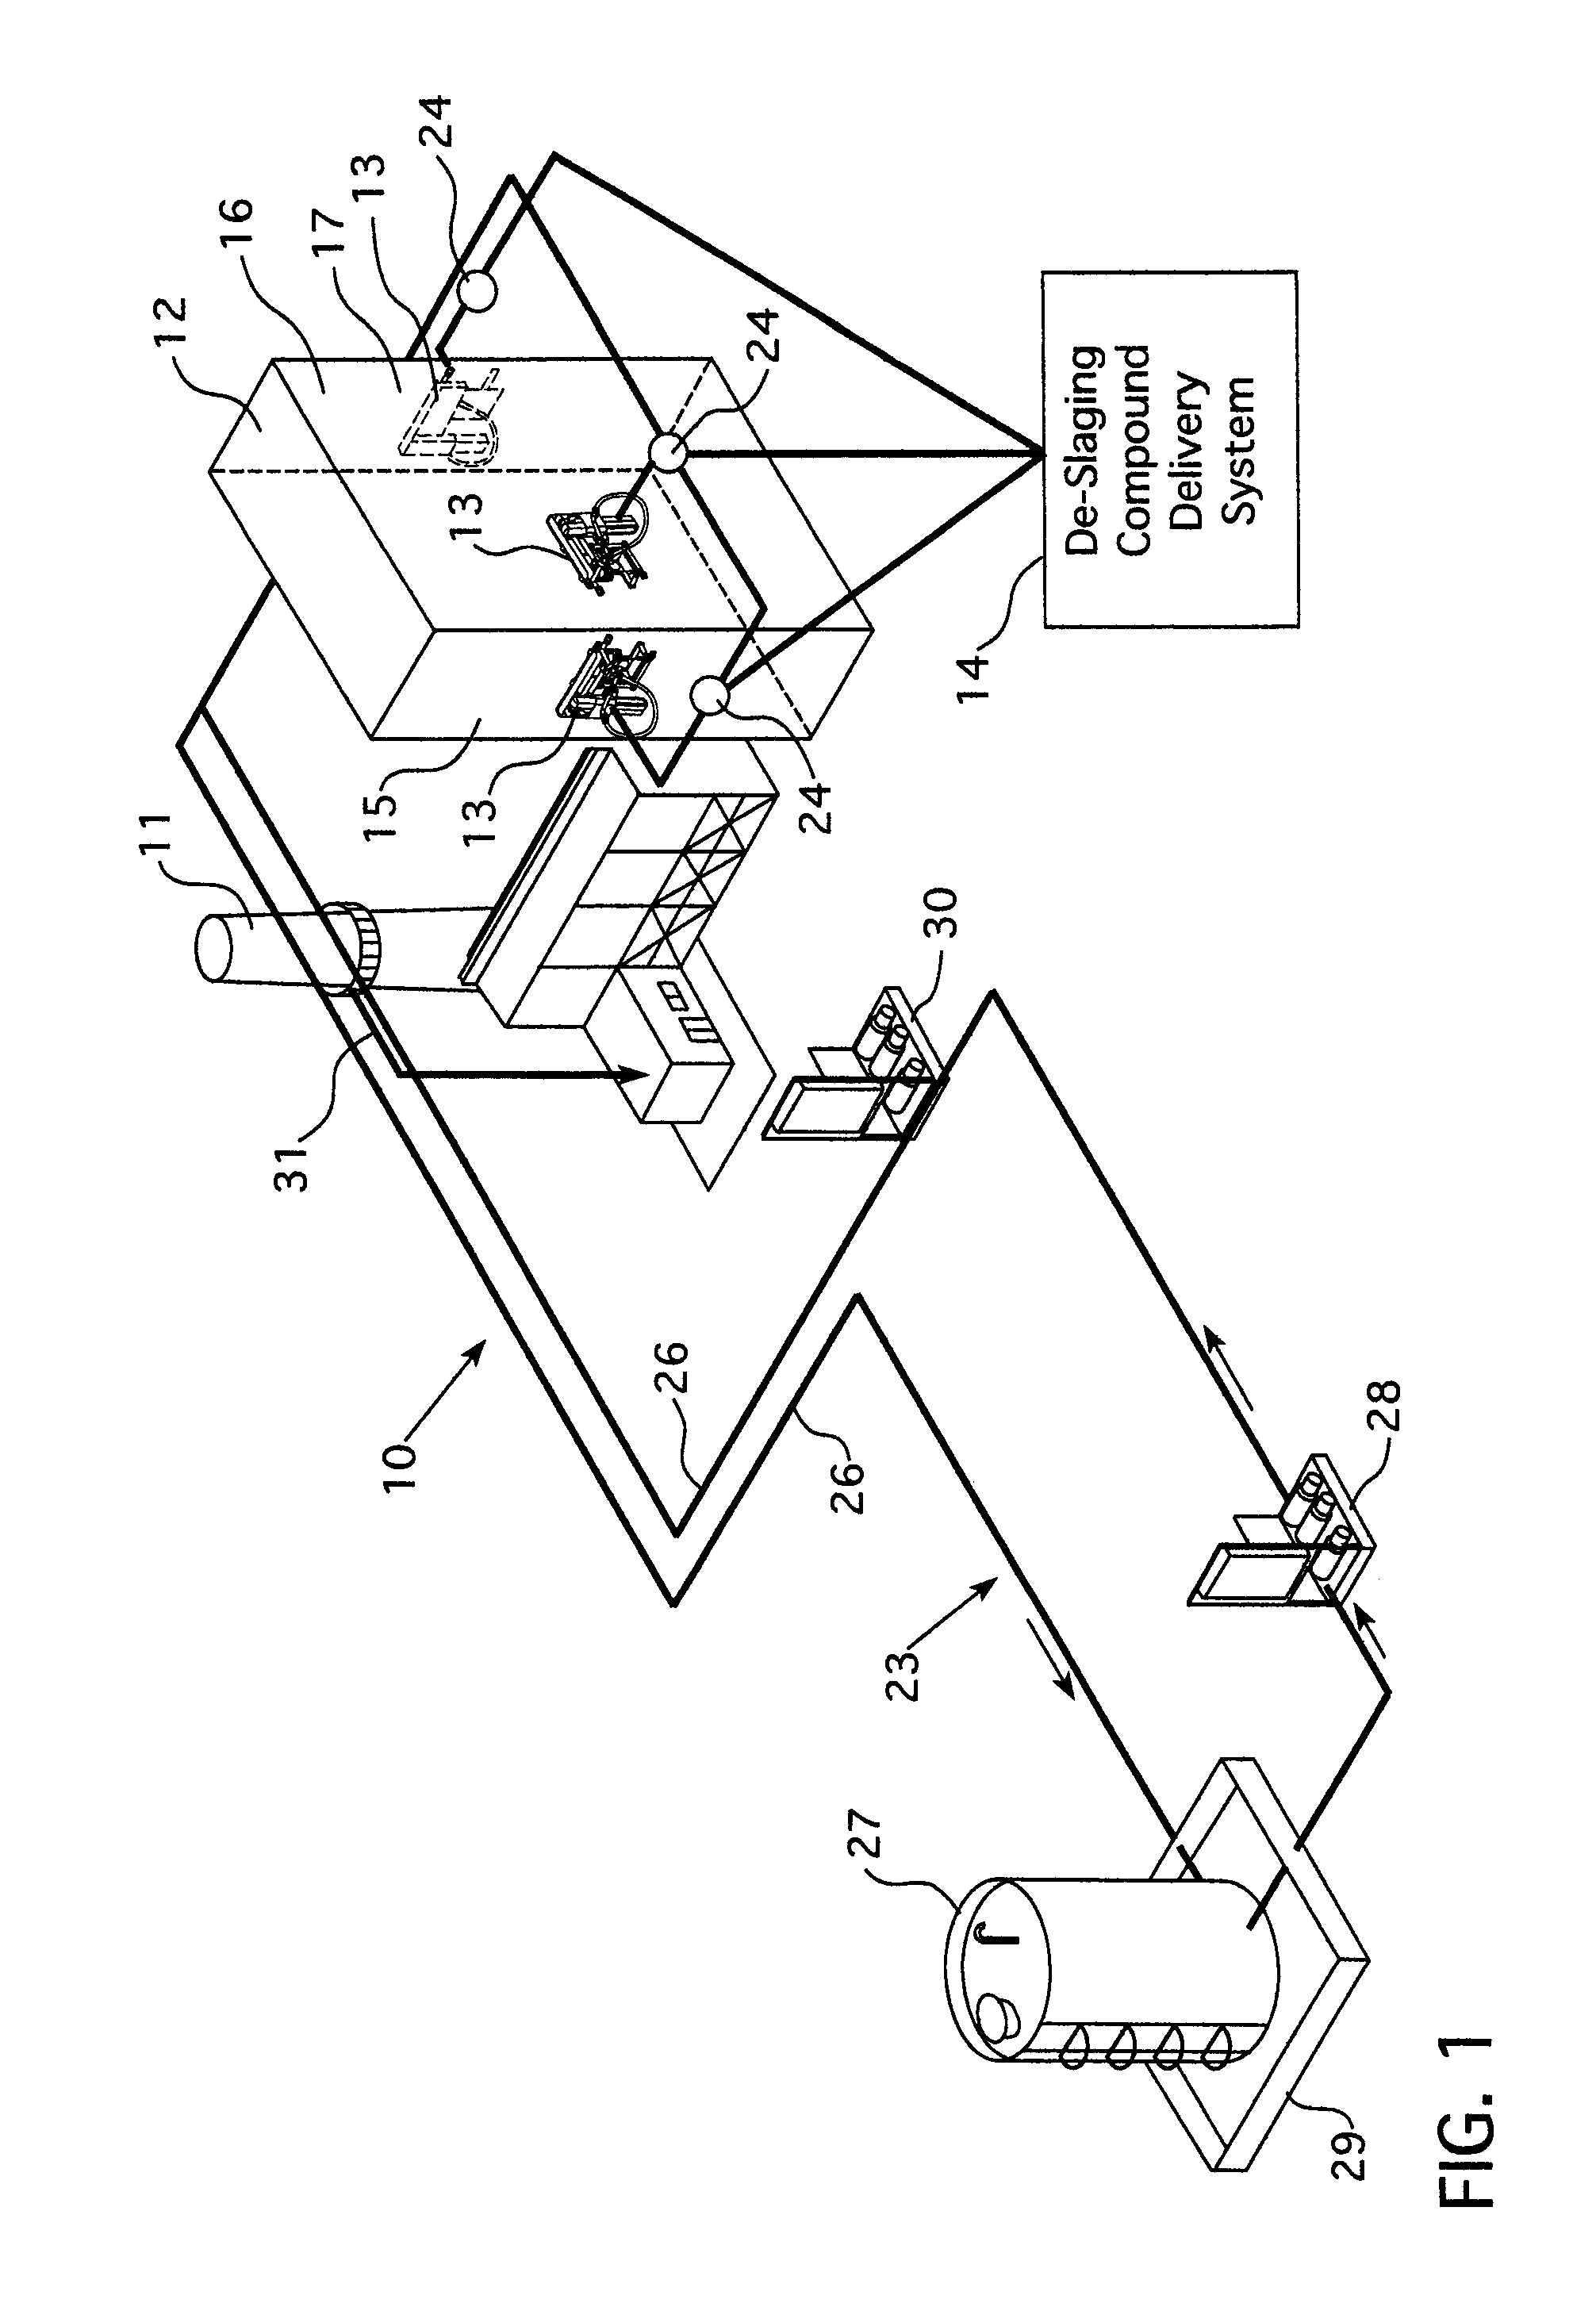 METHOD AND APPARATUS FOR REDUCING NOx EMMISIONS AND SLAG FORMATION IN SOLID FUEL FURNACES